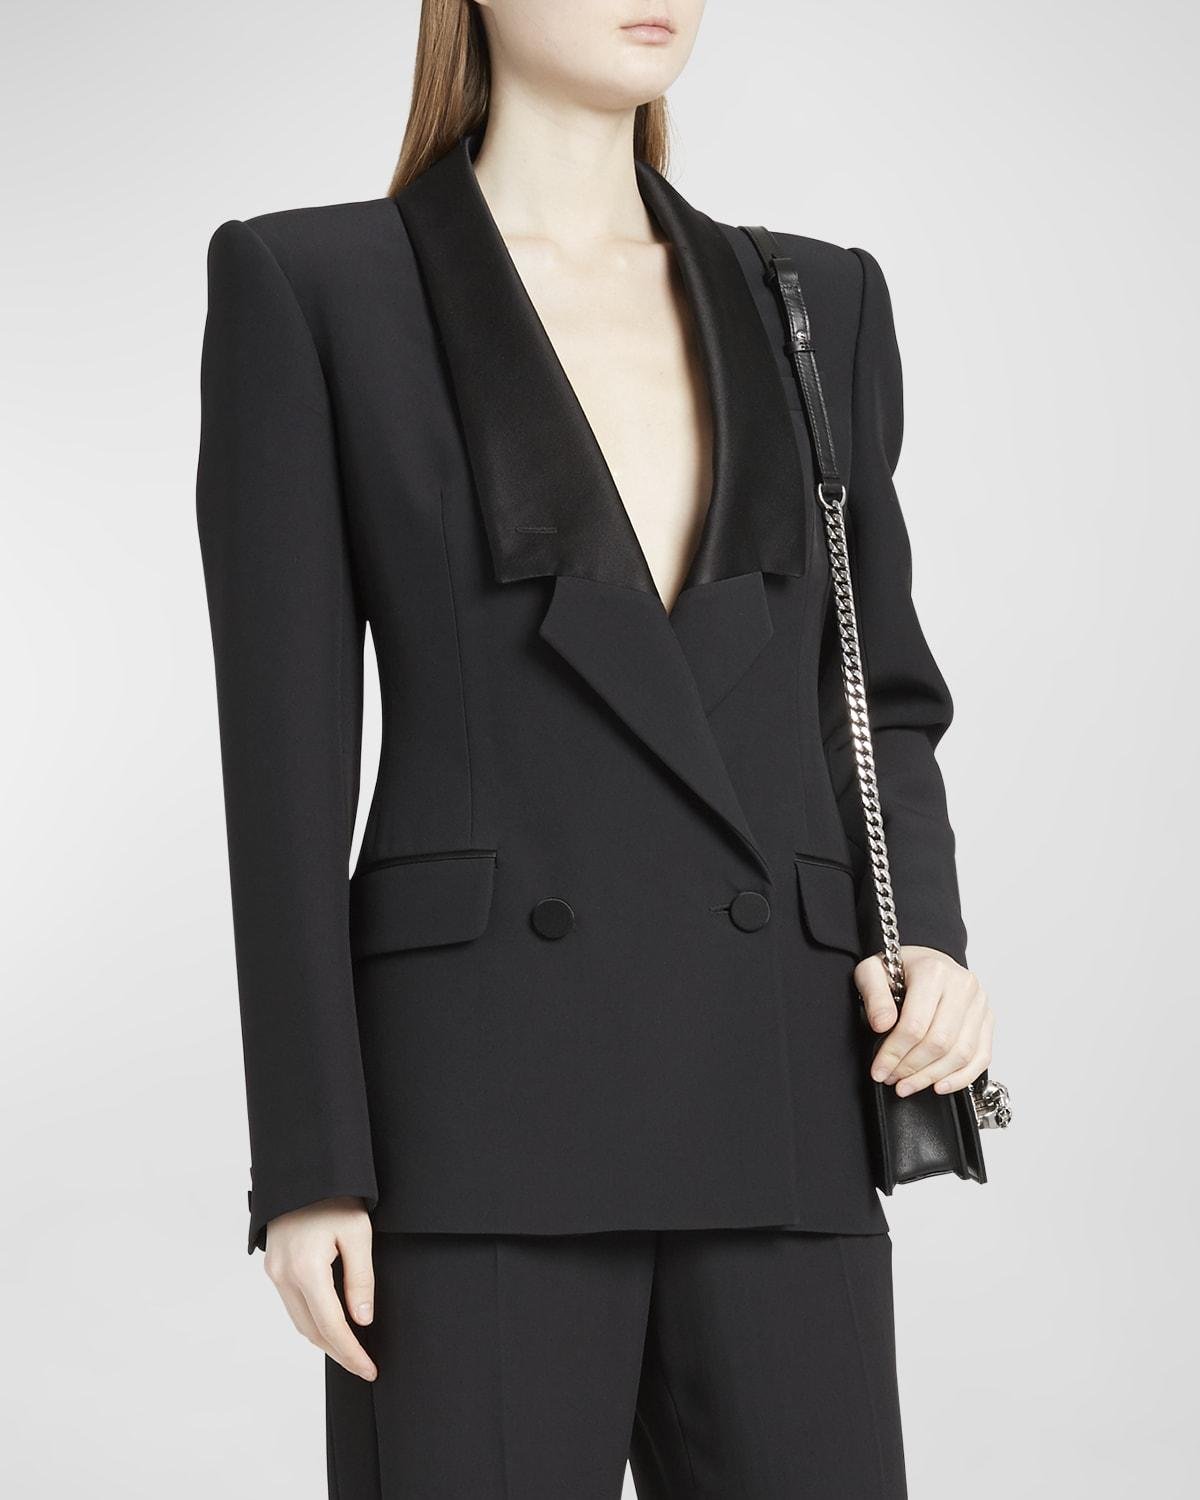 Tailored Blazer Jacket with Satin Lapel by ALEXANDER MCQUEEN